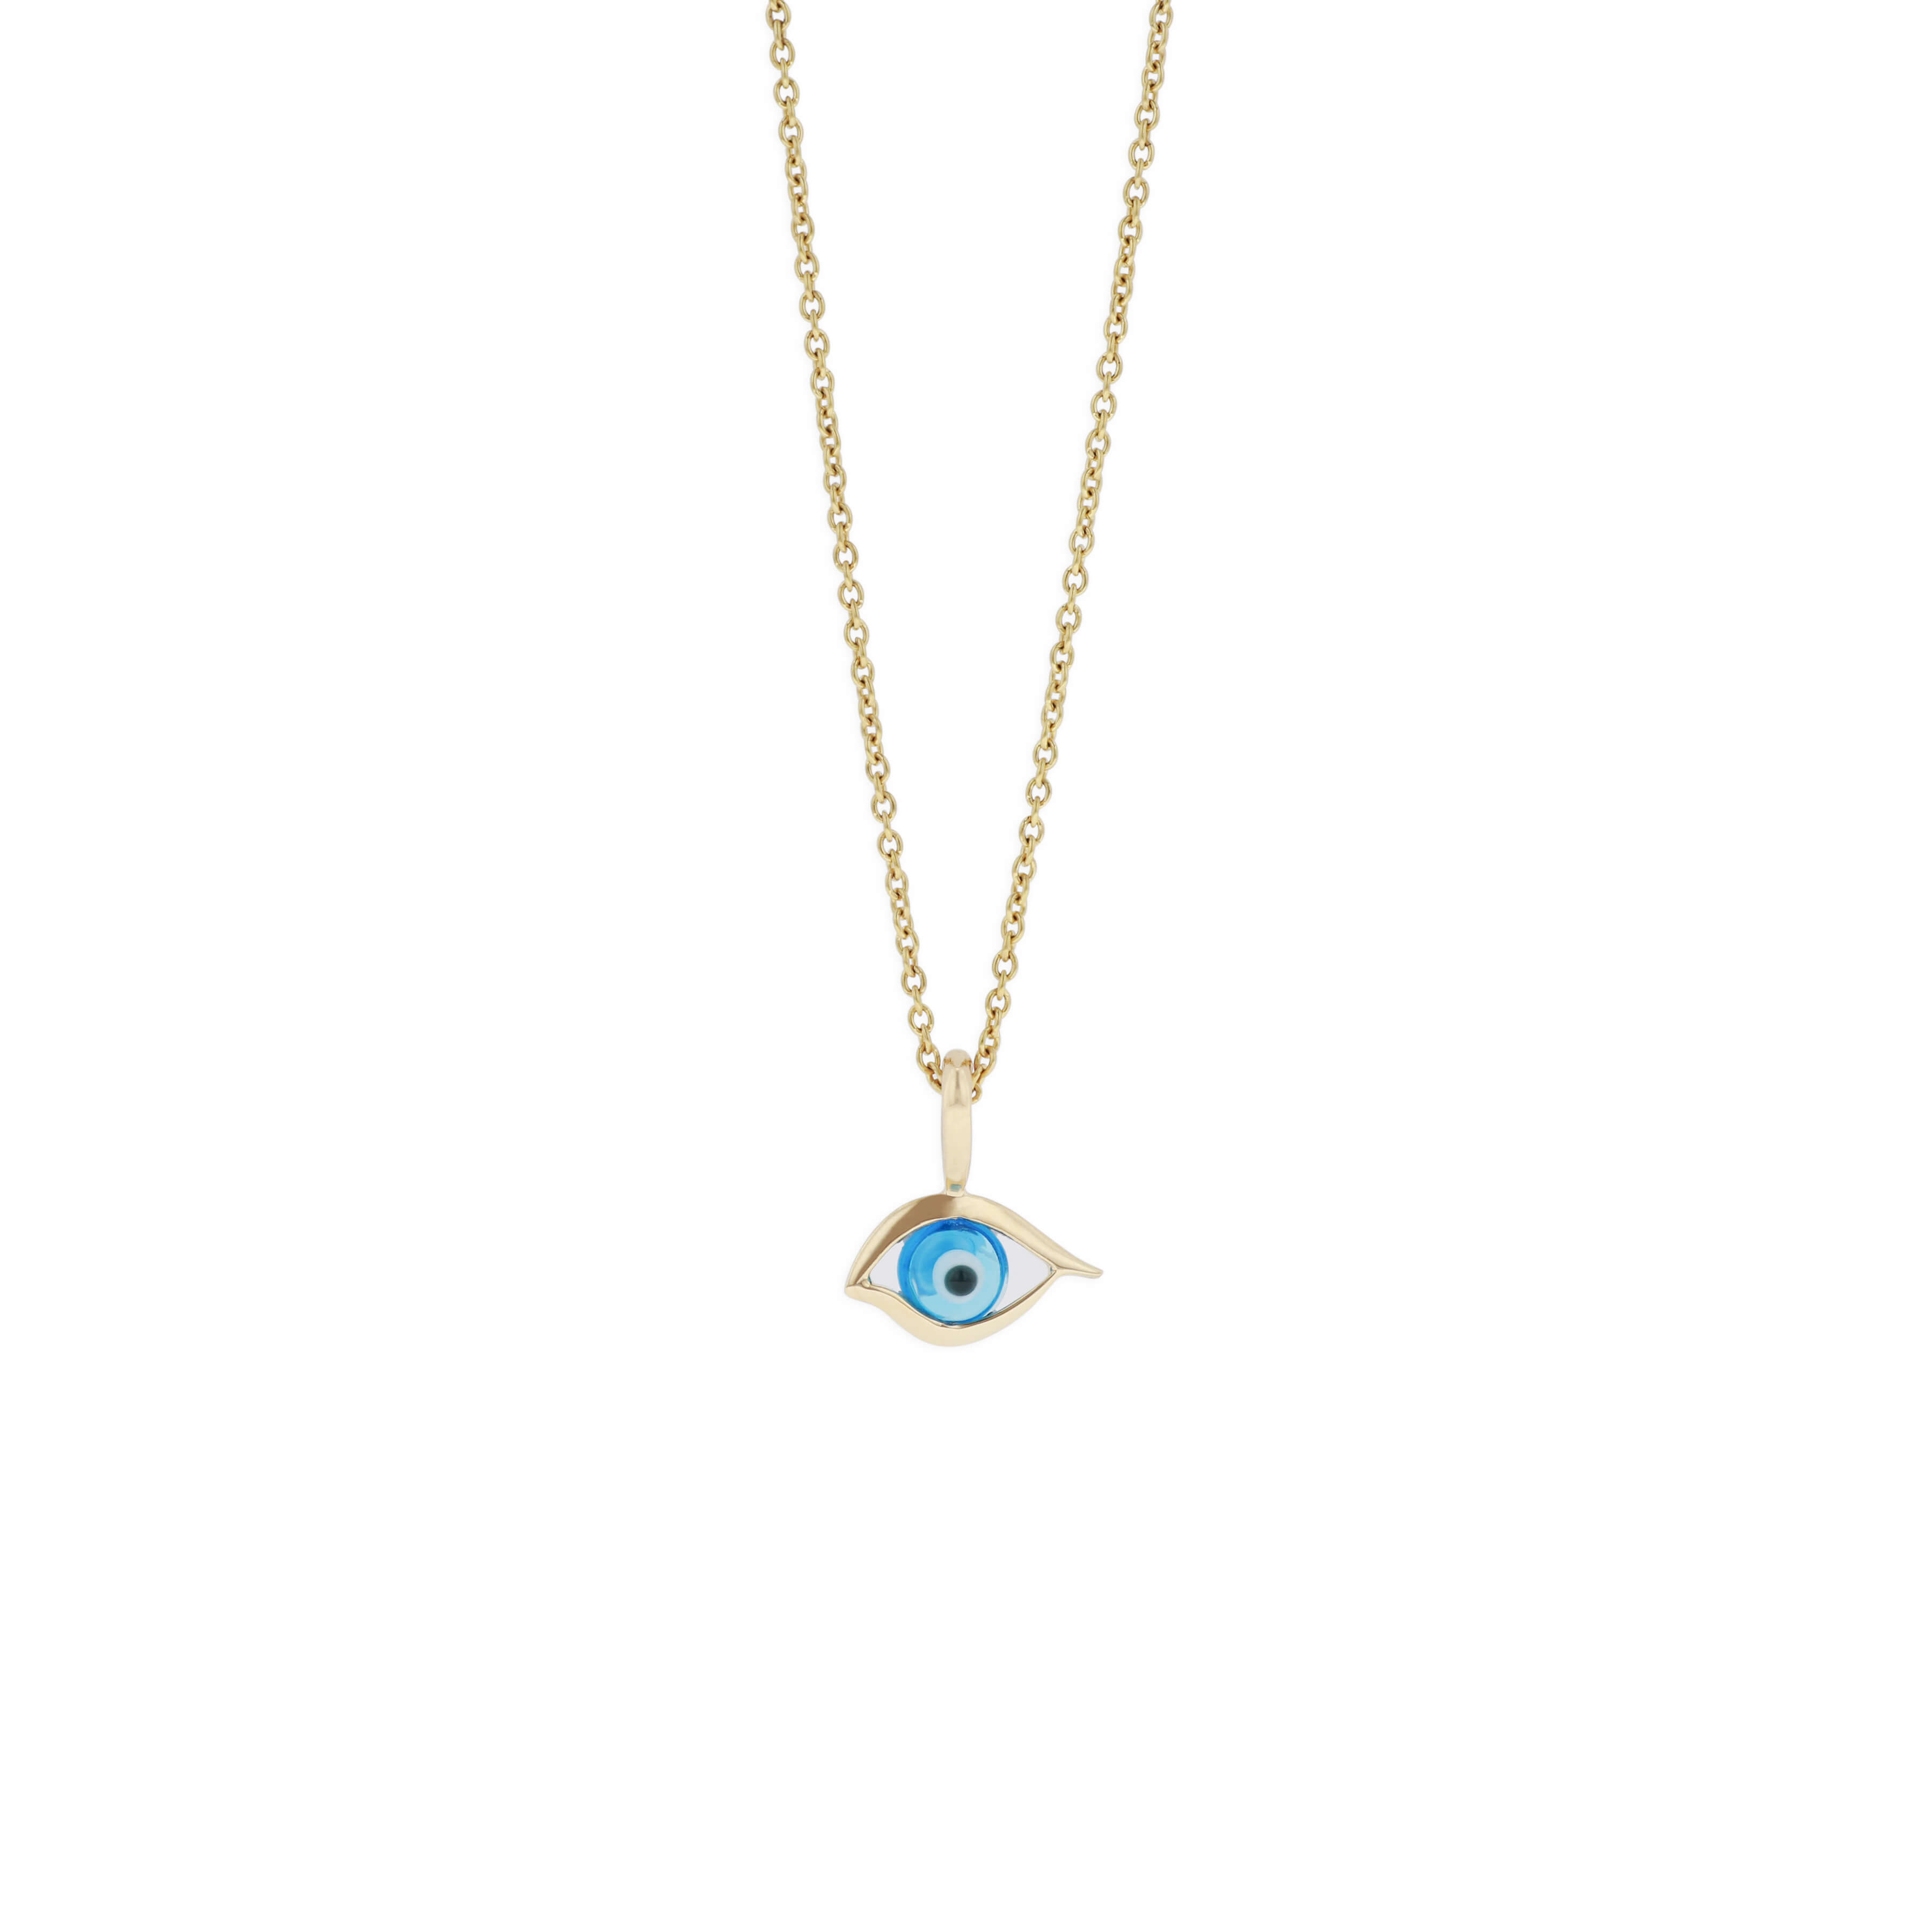 14kt yellow gold mati pendant with inlay